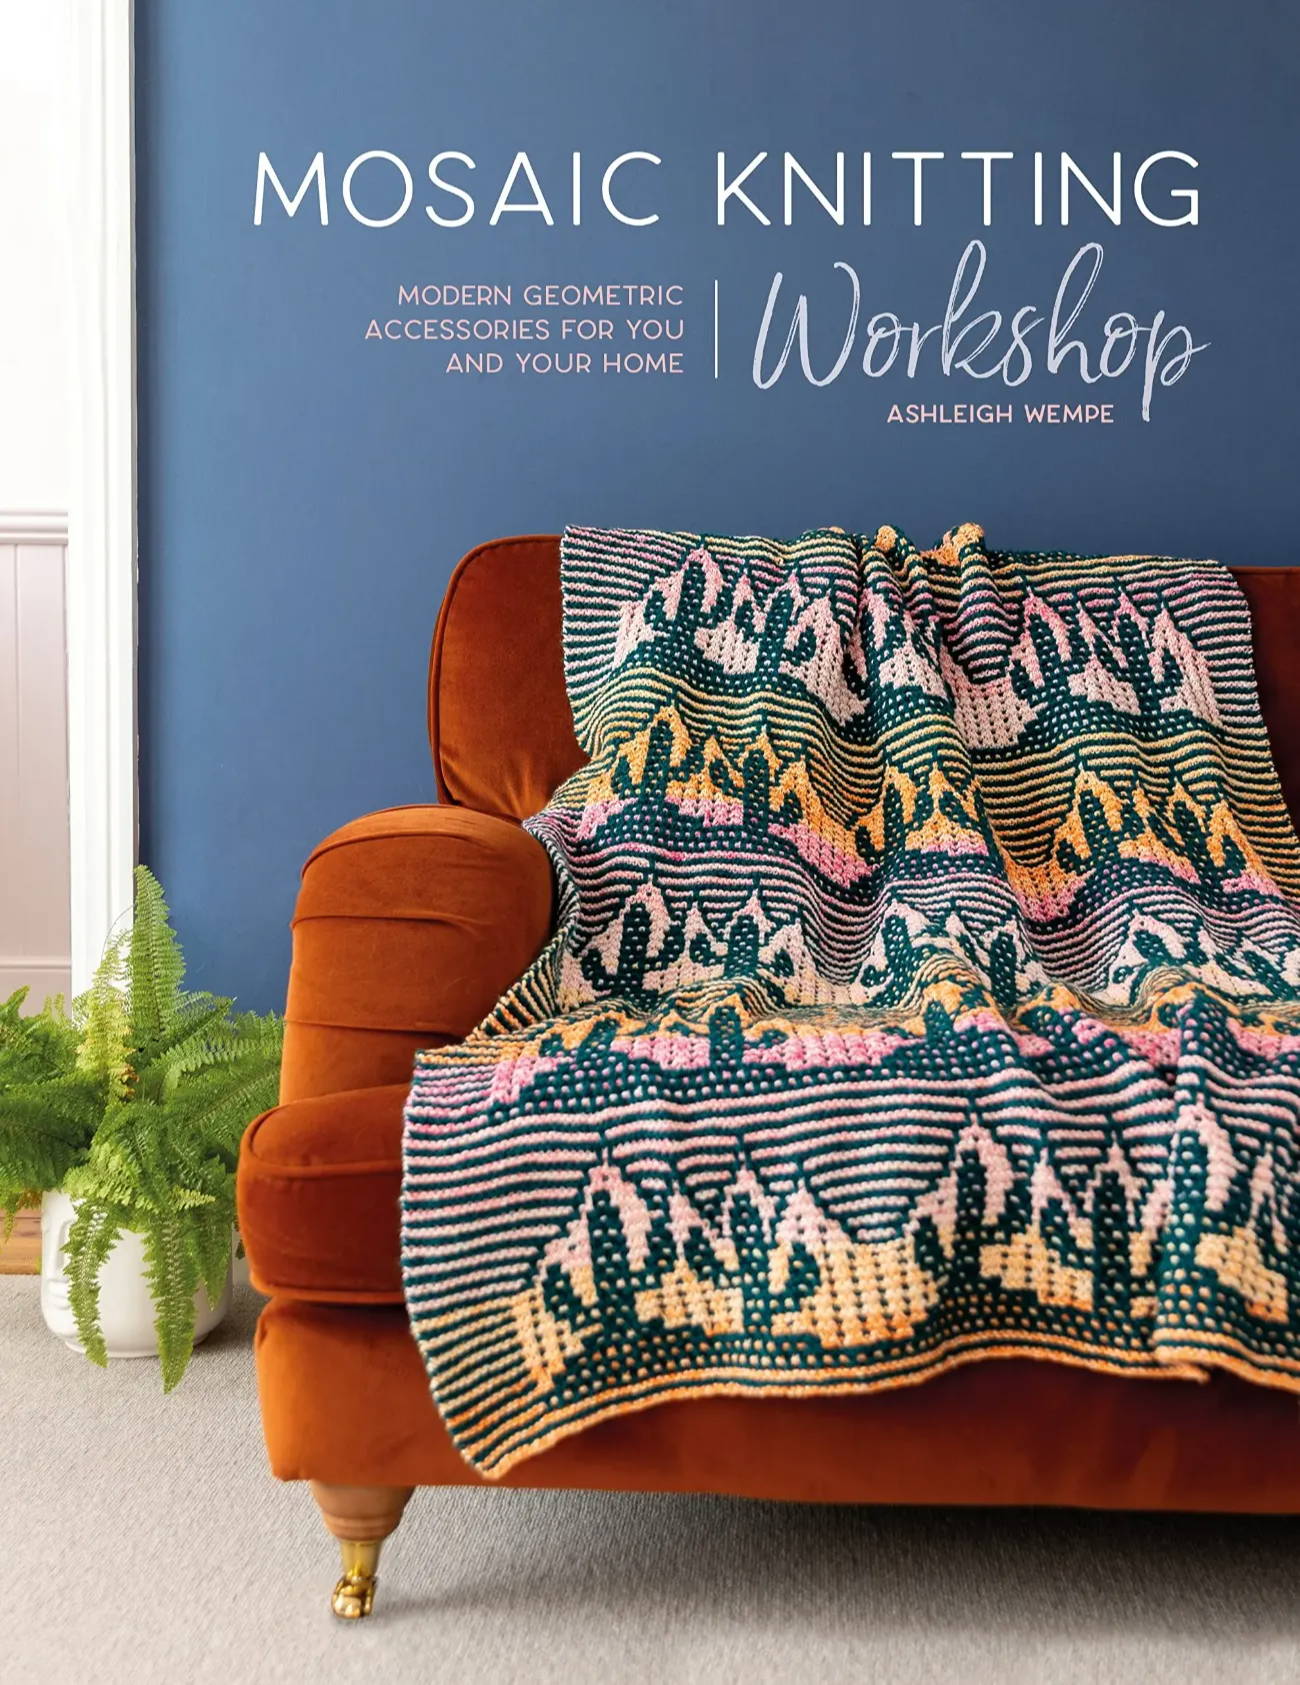 A  book cover titled Mosaic Knitting Workshop by Ashleigh Wempe. There is a  rainbow and green blanket with cactus motifs sitting on a orange chair with a blue wall behind.